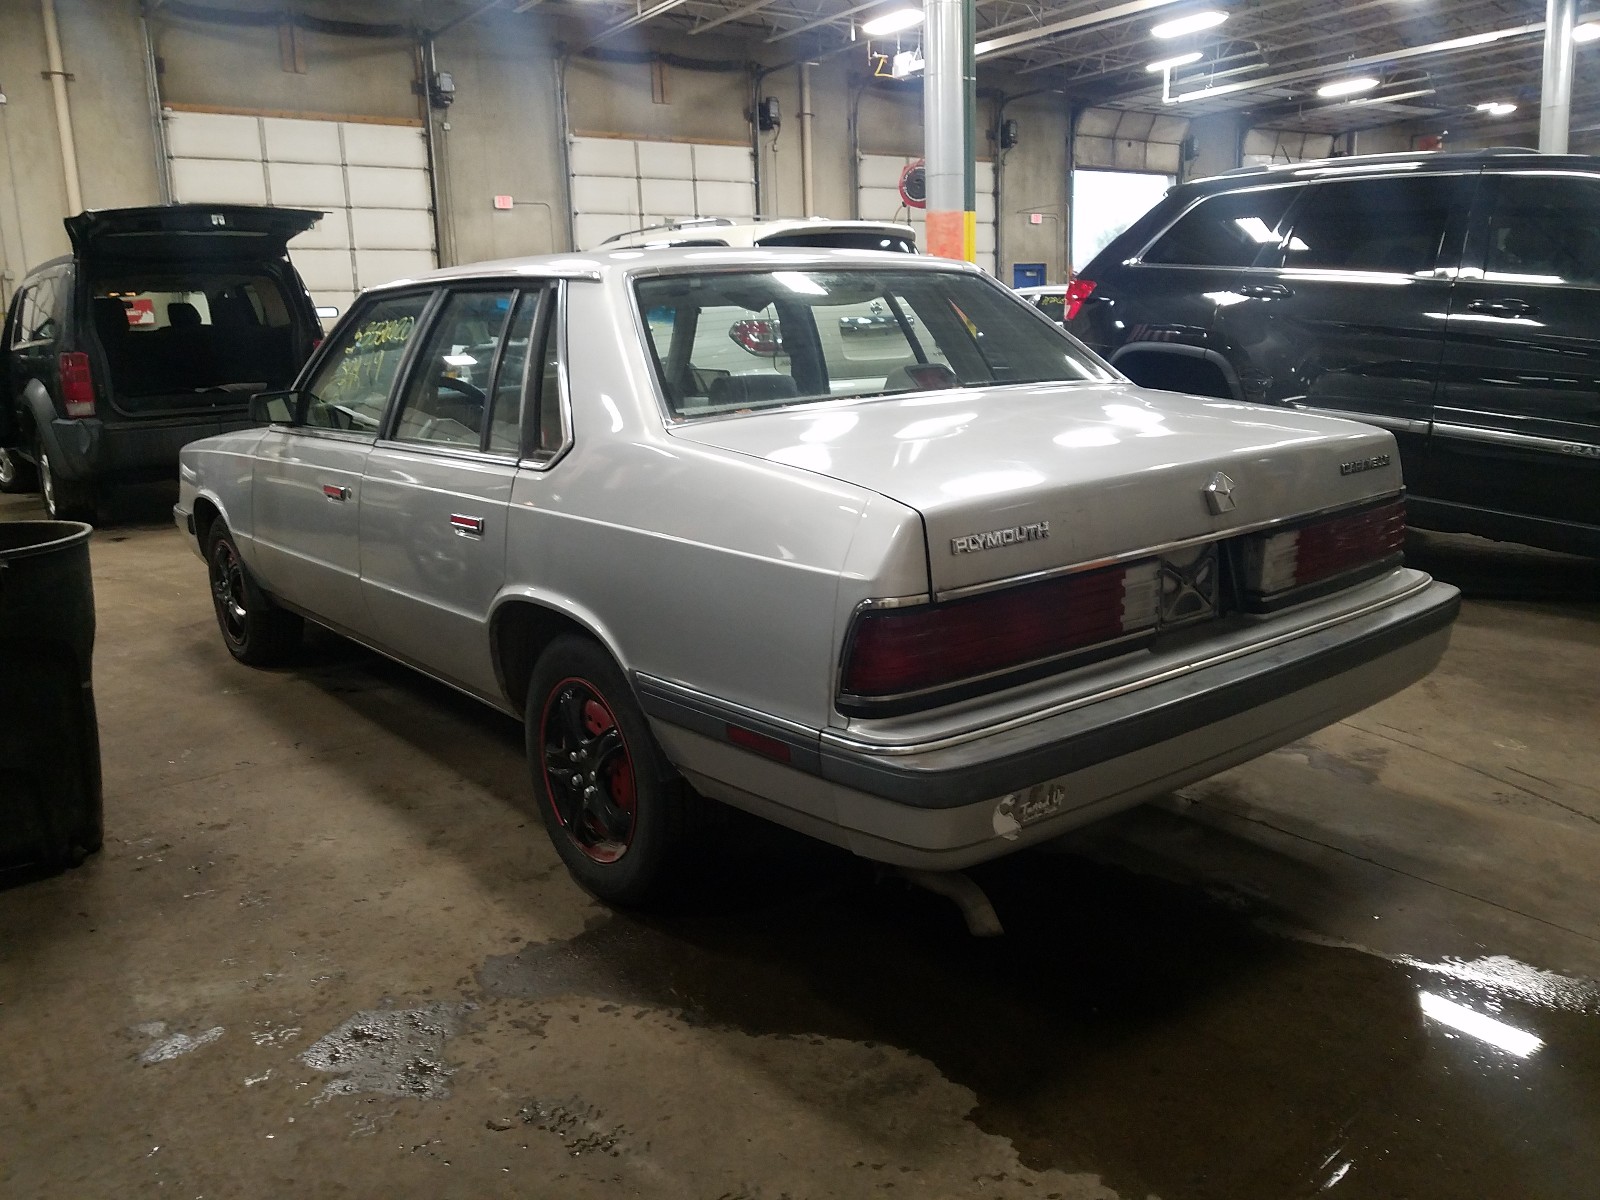 1987 plymouth caravelle for sale at copart blaine mn lot 53586620 salvagereseller com 1987 plymouth caravelle for sale at copart blaine mn lot 53586620 salvagereseller com